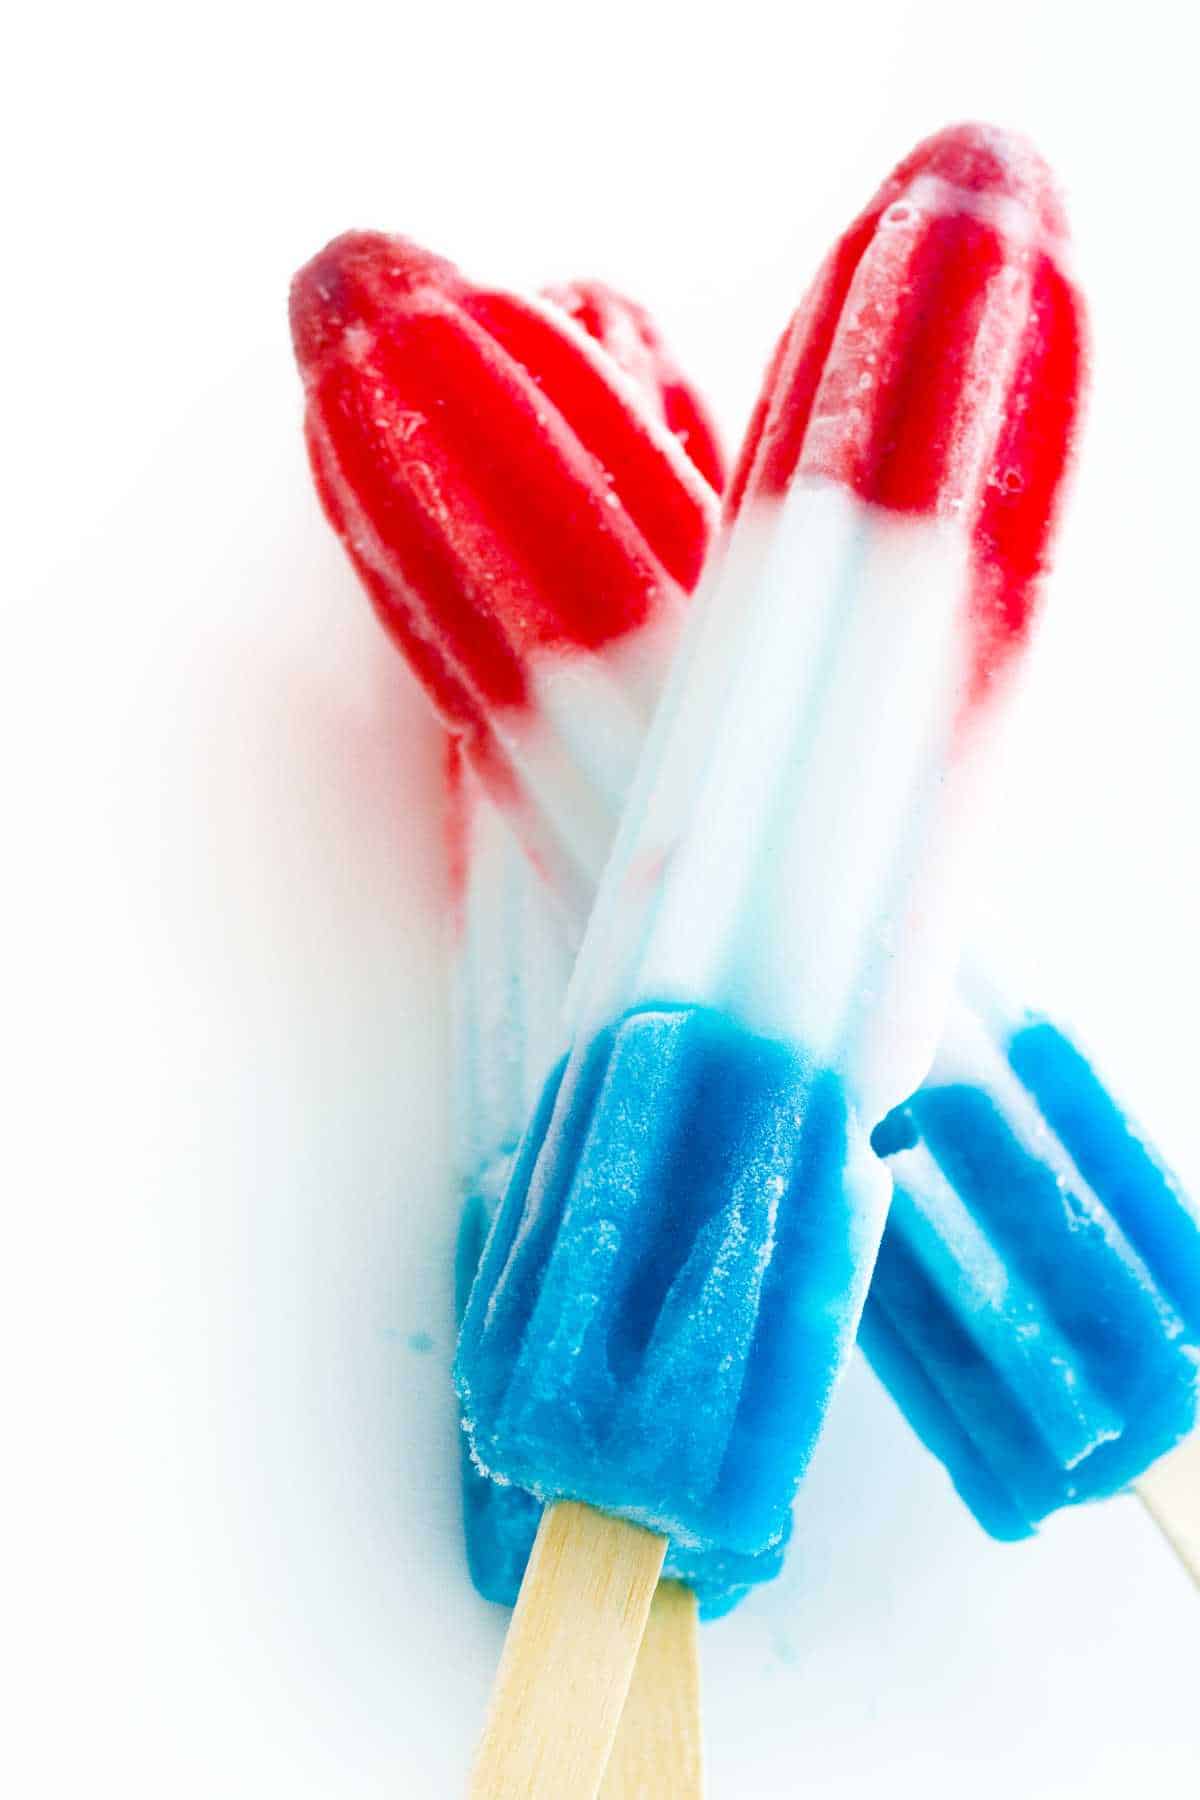 red white and blue popsicles on a tray of ice cubes.